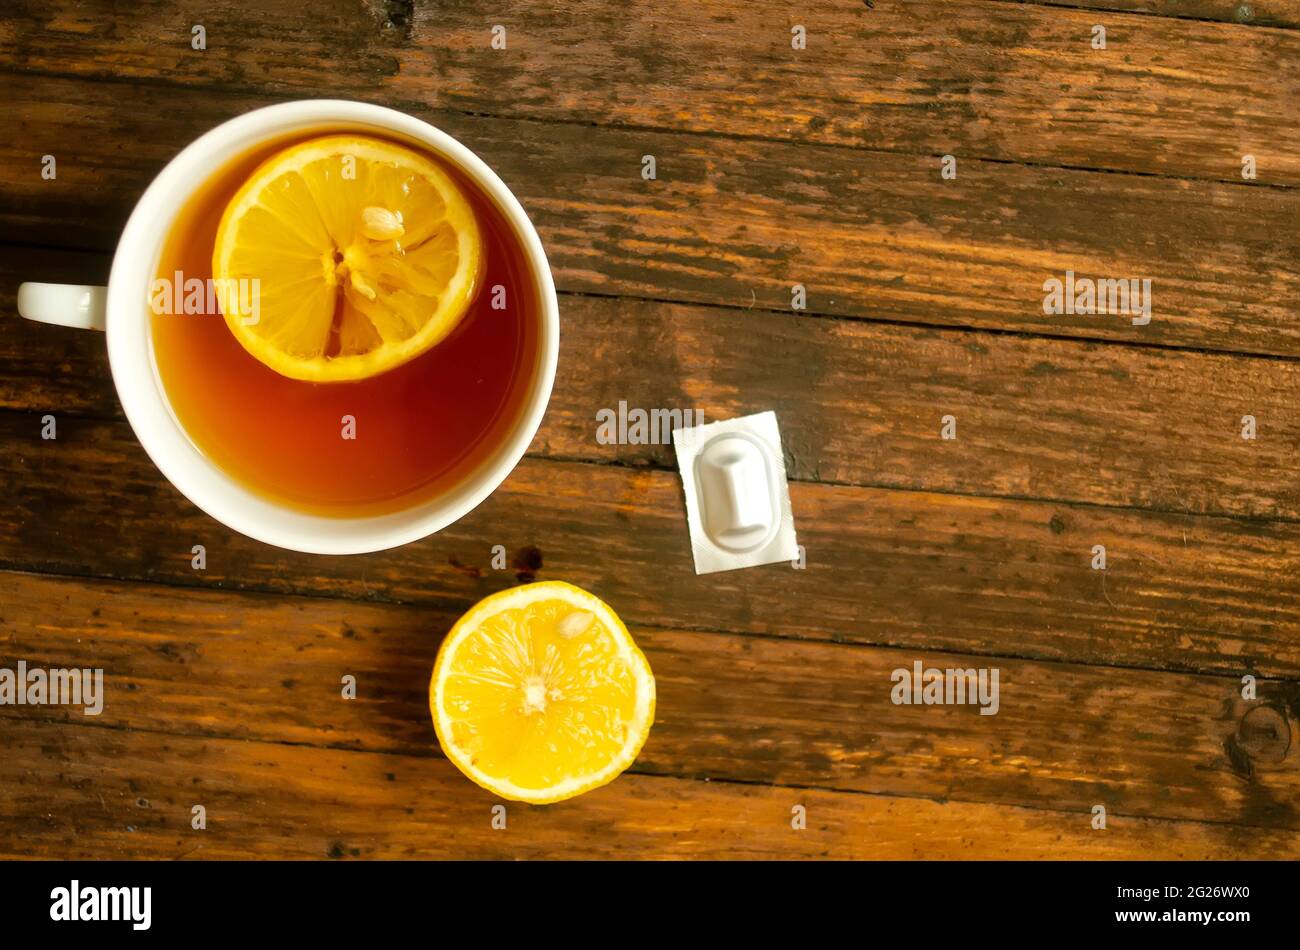 Top view, a cup of tea with lemon, a half of lemon and one pill on wooden background, copyspace. Stock Photo